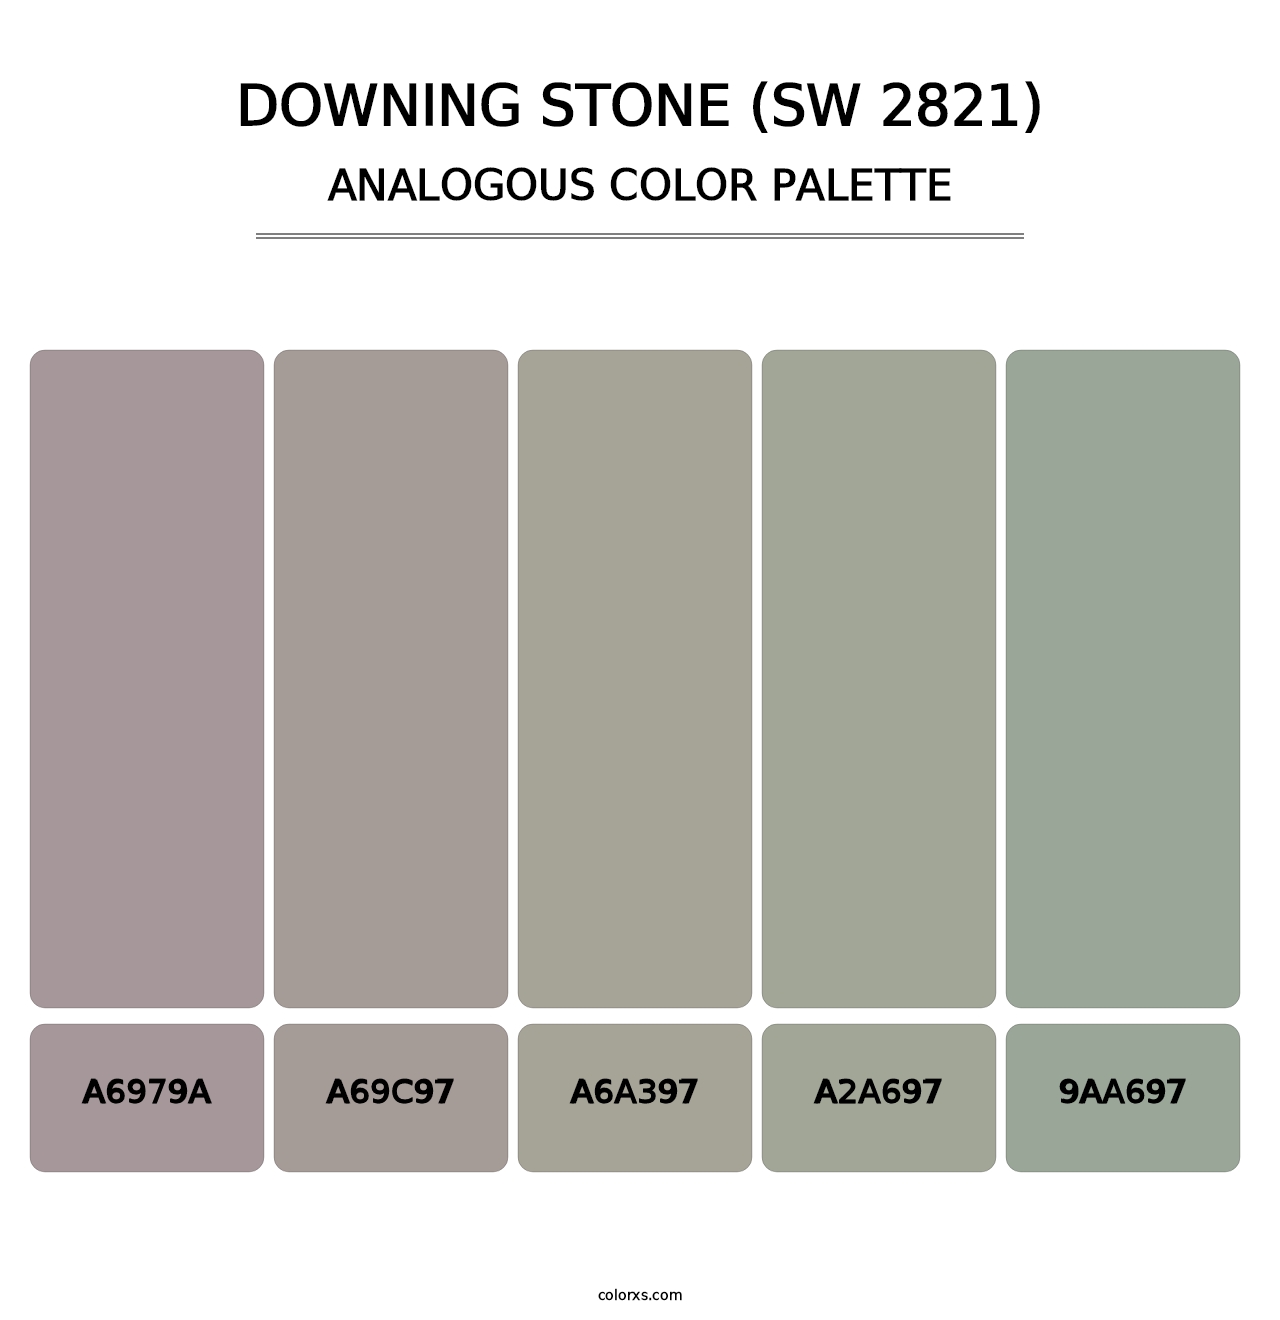 Downing Stone (SW 2821) - Analogous Color Palette